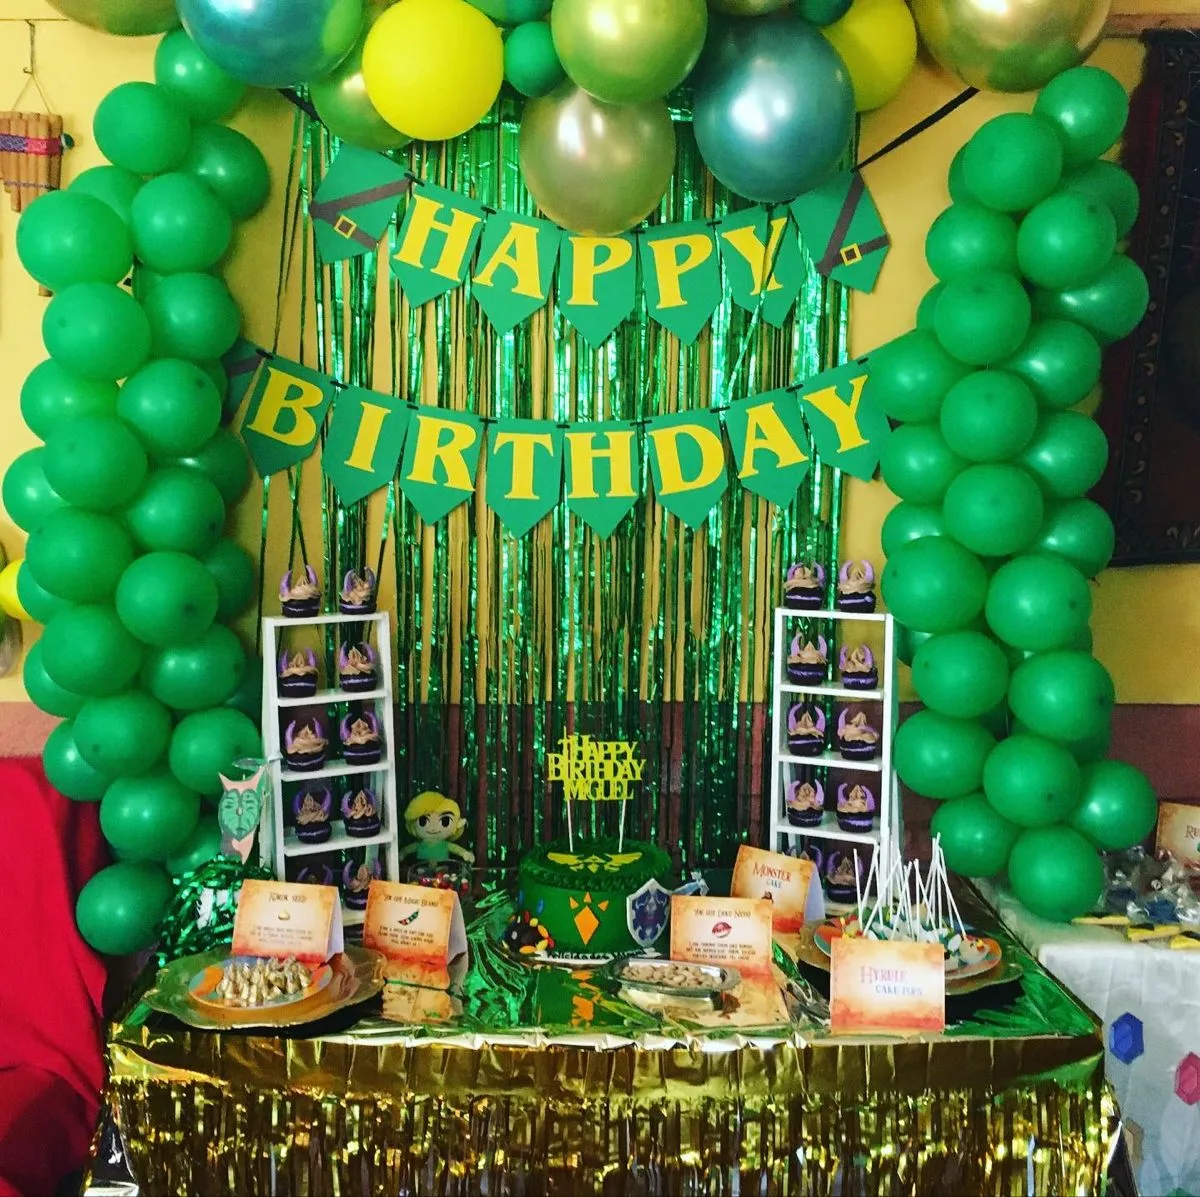 Zelda Birthday Decorations Metallic Table And Wall Fringe Curtain With Green Banners And Balloons